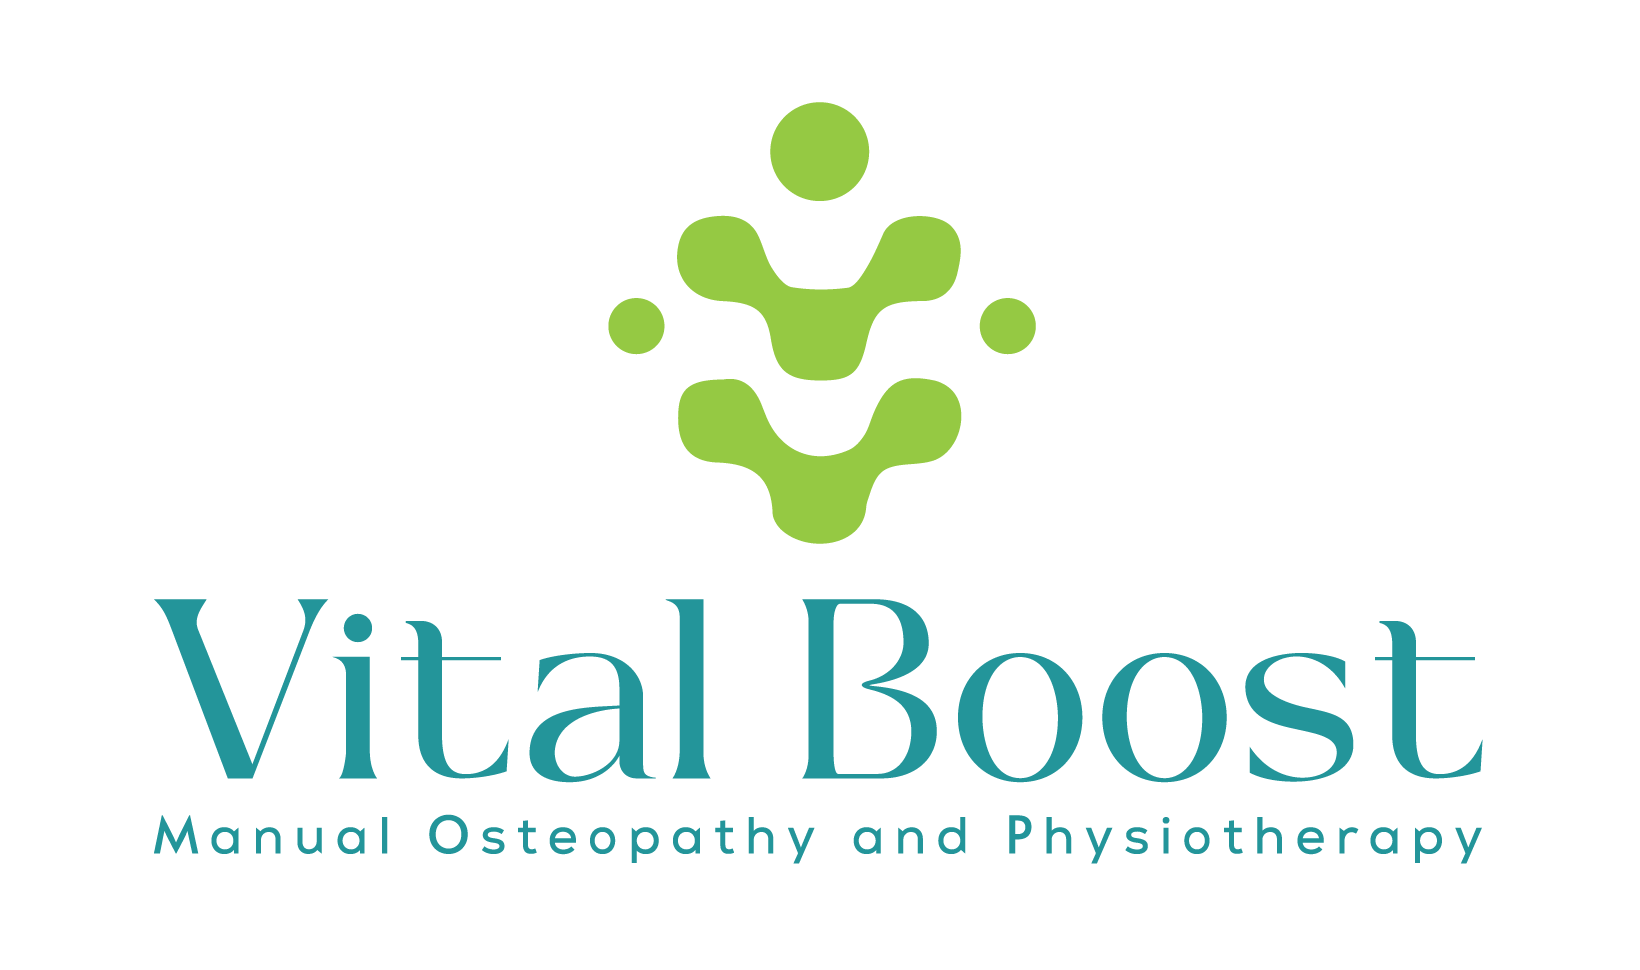 Vital Boost (Manual Osteopathy and Physiotherapy)|Hospitals|Medical Services